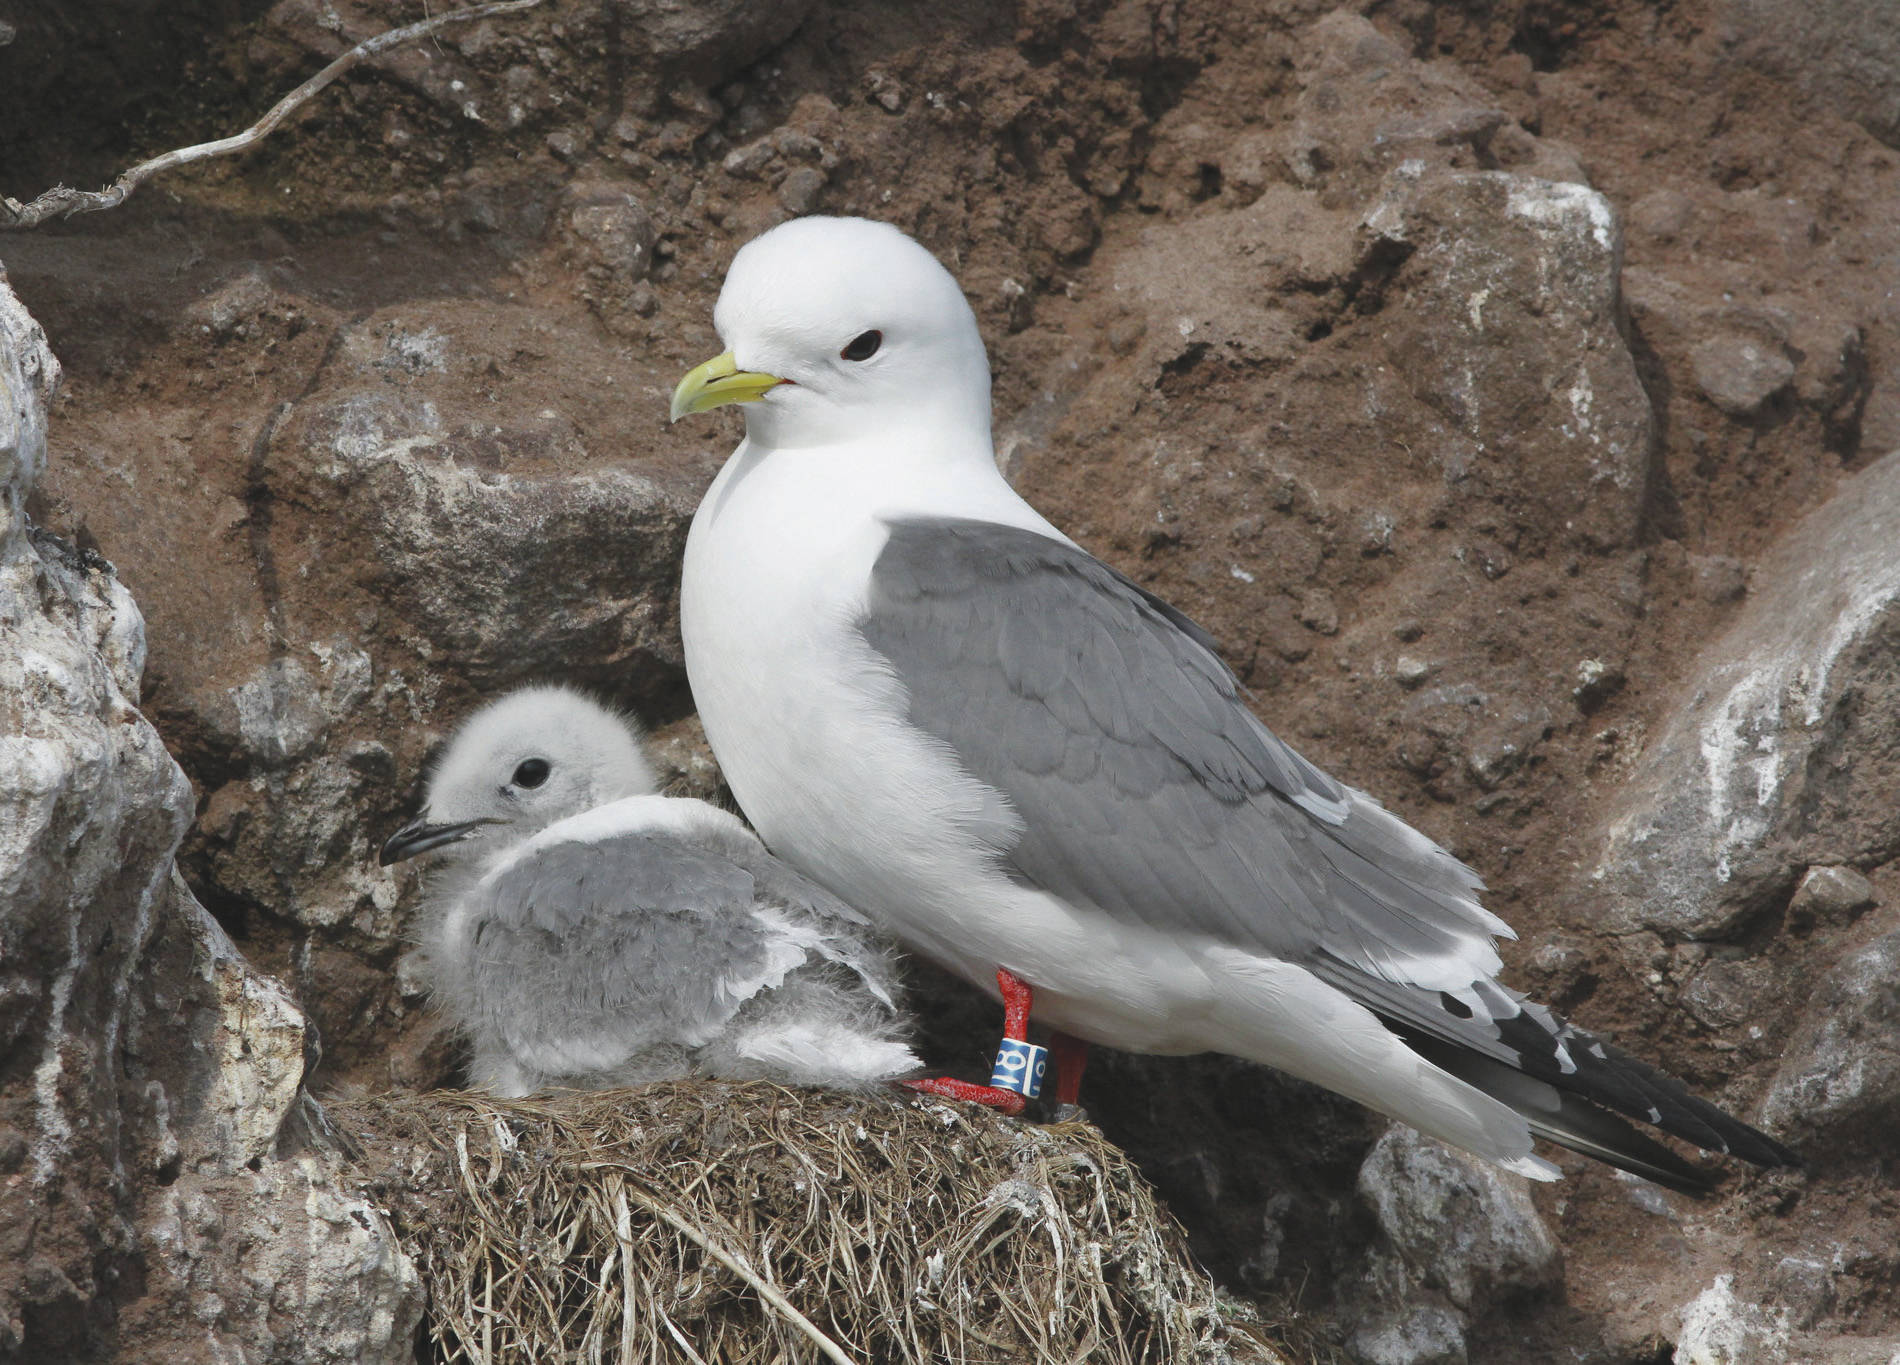 Kittiwakes build their sturdy nests on cliff sides, and they prefer to live in crowded neighborhoods for additional safety from predators. (Photo by Ronan Dugan/USFWS)